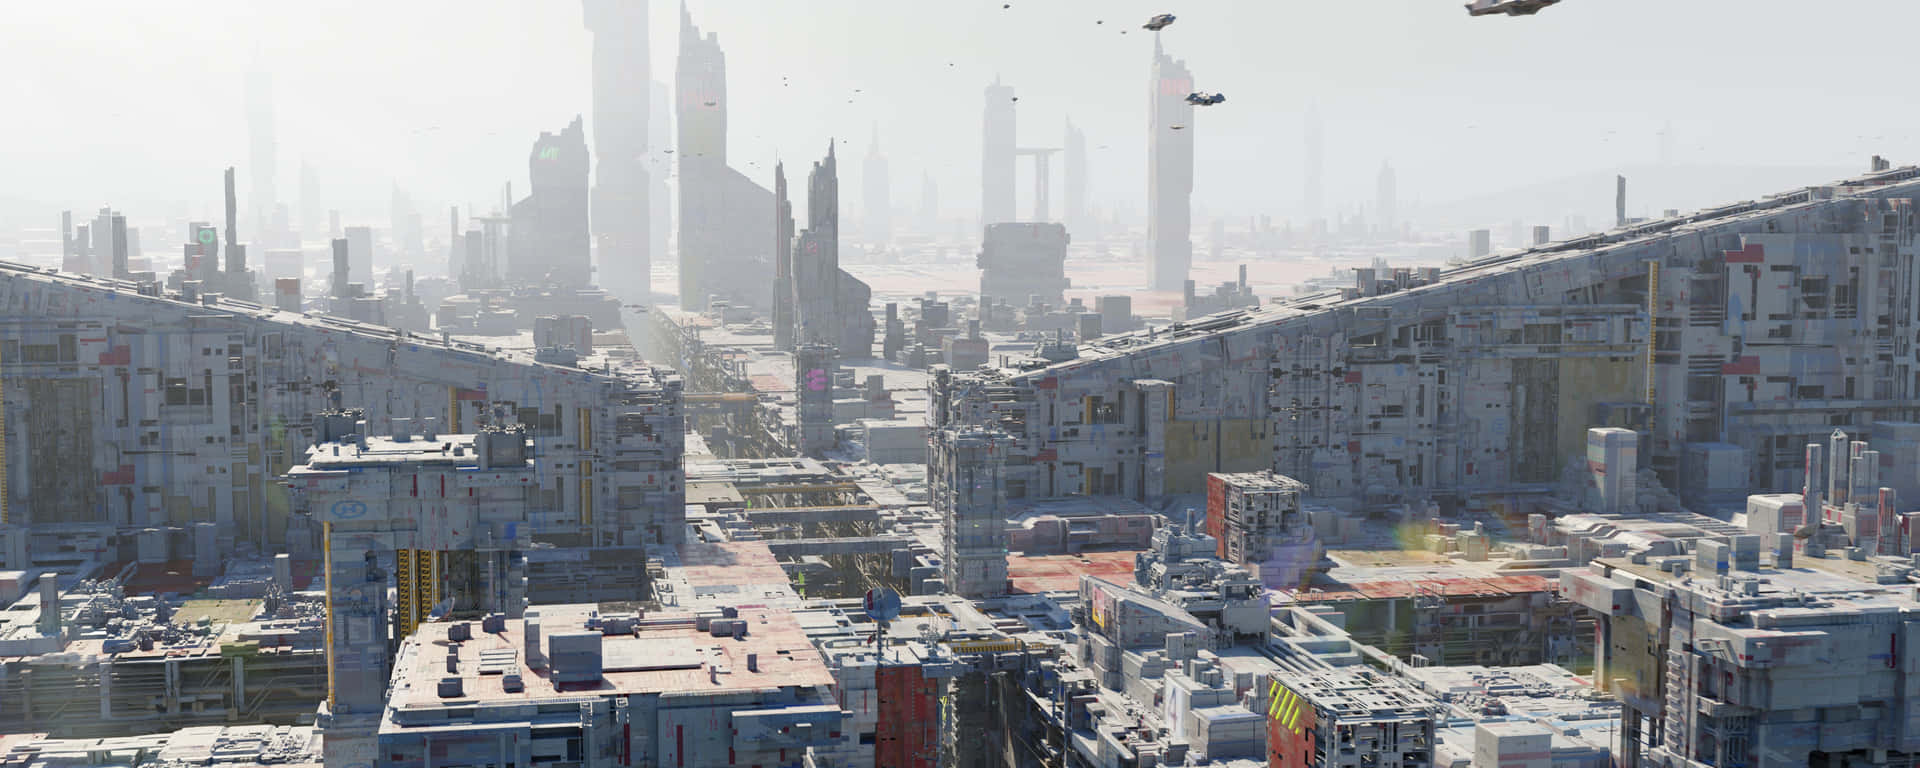 Futuristic City With Flying Drones